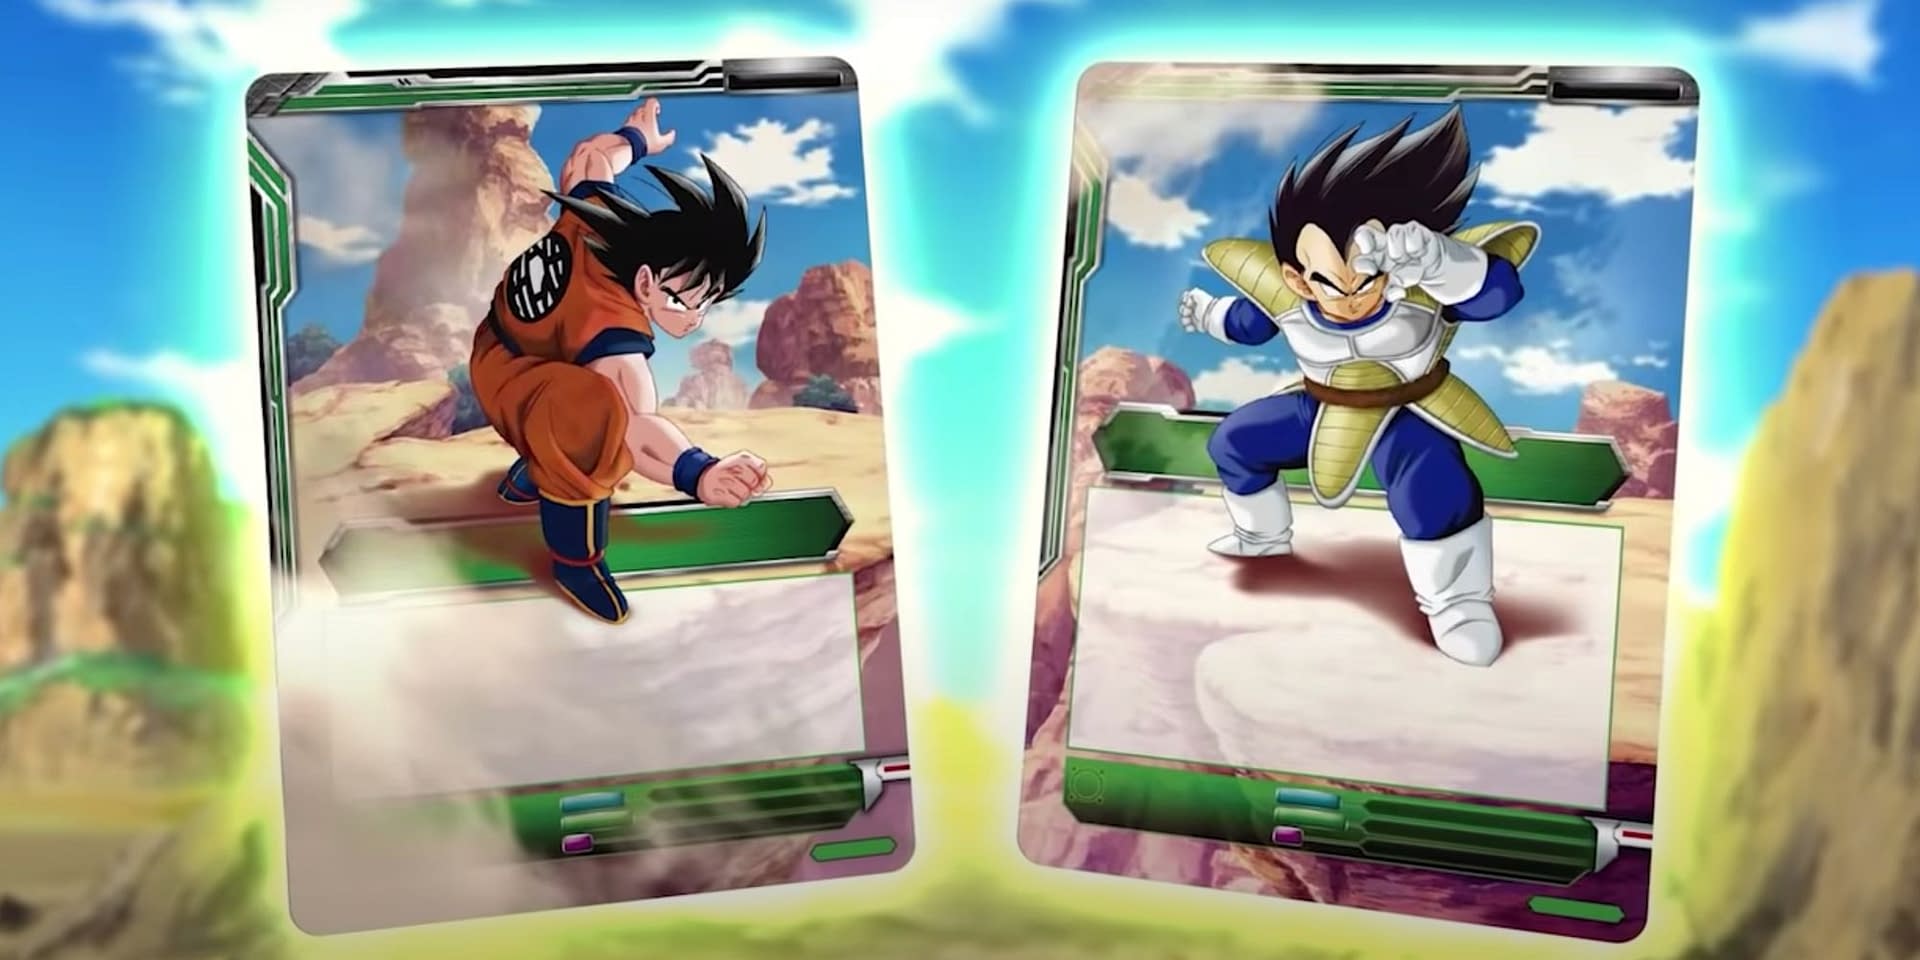 Goku And Vegeta Team Up In The Final Trailer For 'Dragon Ball Super: Broly